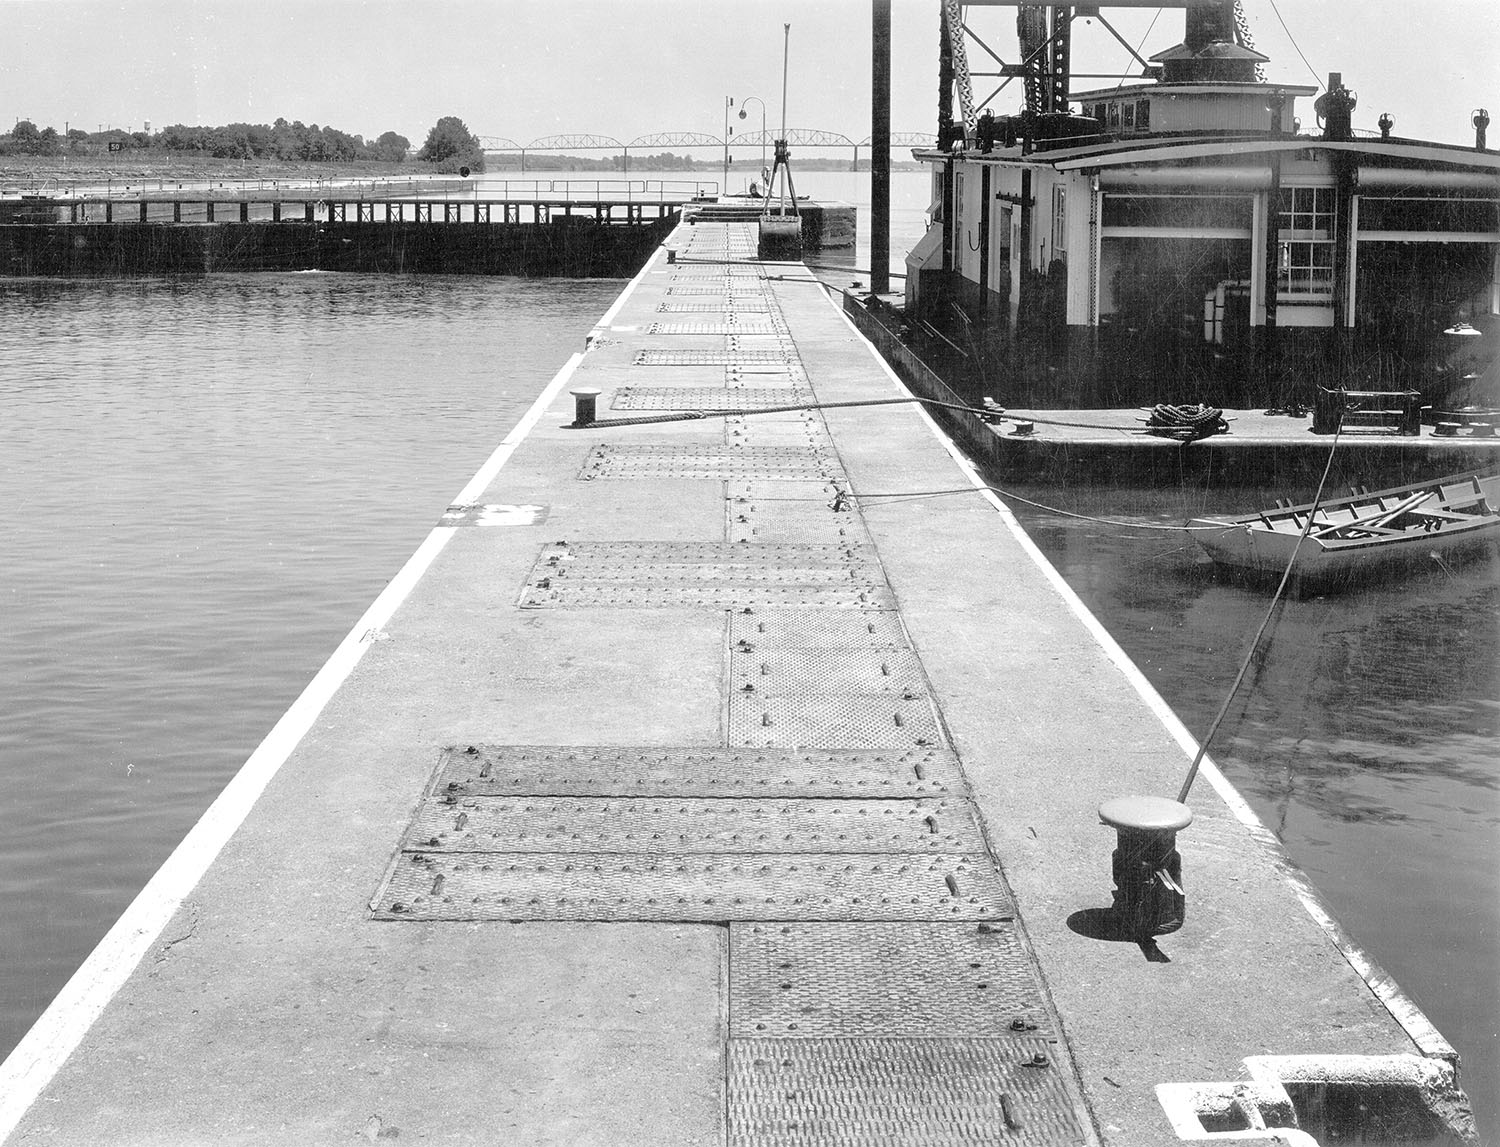 LD 559 works at Lock and Dam 52, near Brookport, Illinois, in May 1949. The maneuvering boat is the last of its kind in operation on the Ohio River. As it is no longer needed with the opening of the Olmsted Locks and Dam, the U.S. Army Corps of Engineers is looking to find a home where the vessel can be displayed for historical purposes, either on land or in the river. (Photo courtesy of the Louisville Engineer District)